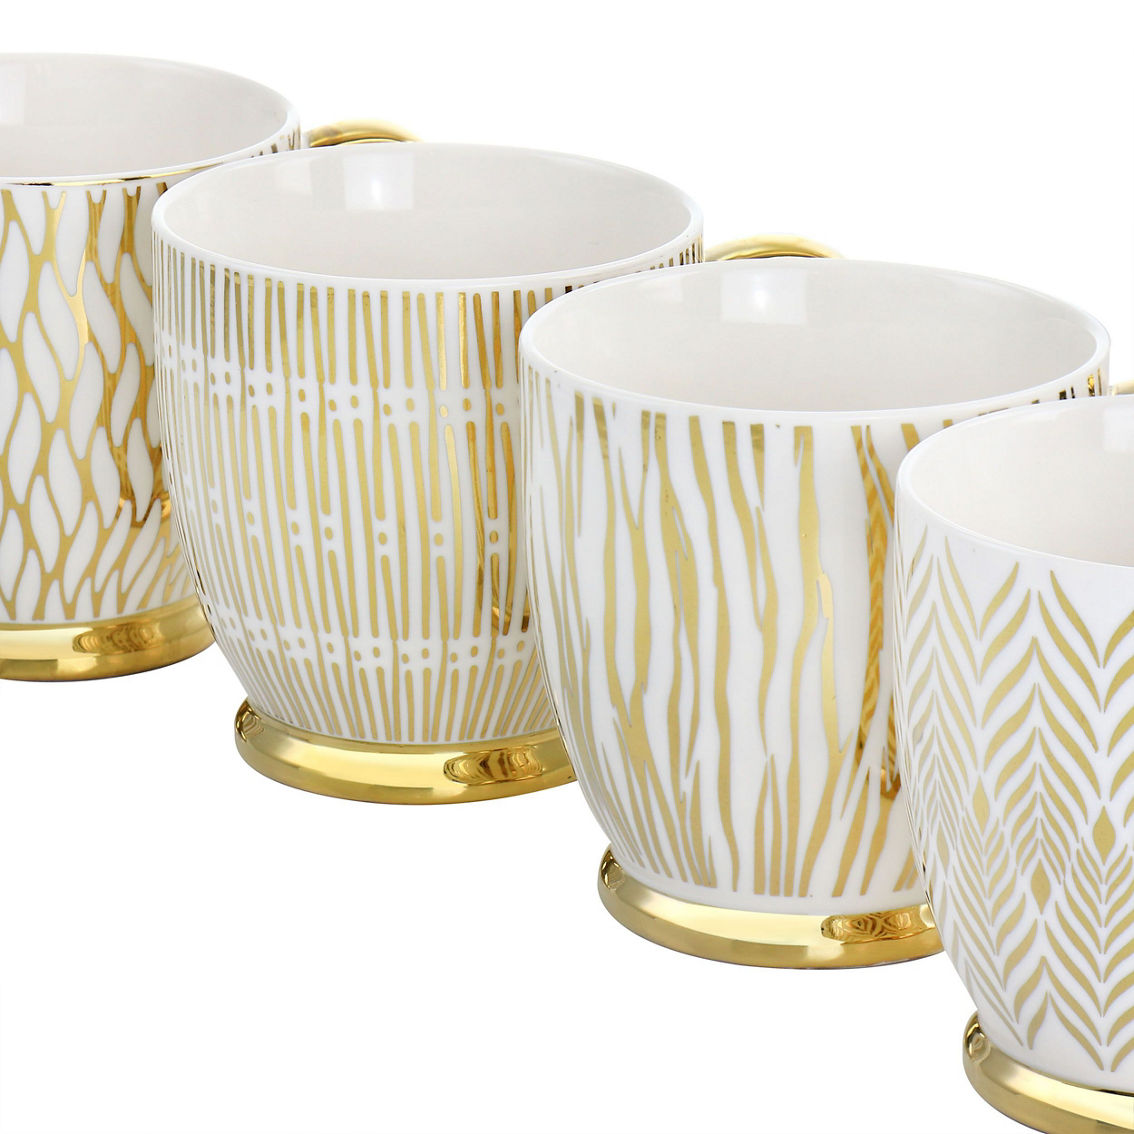 Gibson Home Gold Finch 4 Piece 16.7oz Electroplated Fine Ceramic Mug Set in Gold - Image 3 of 5